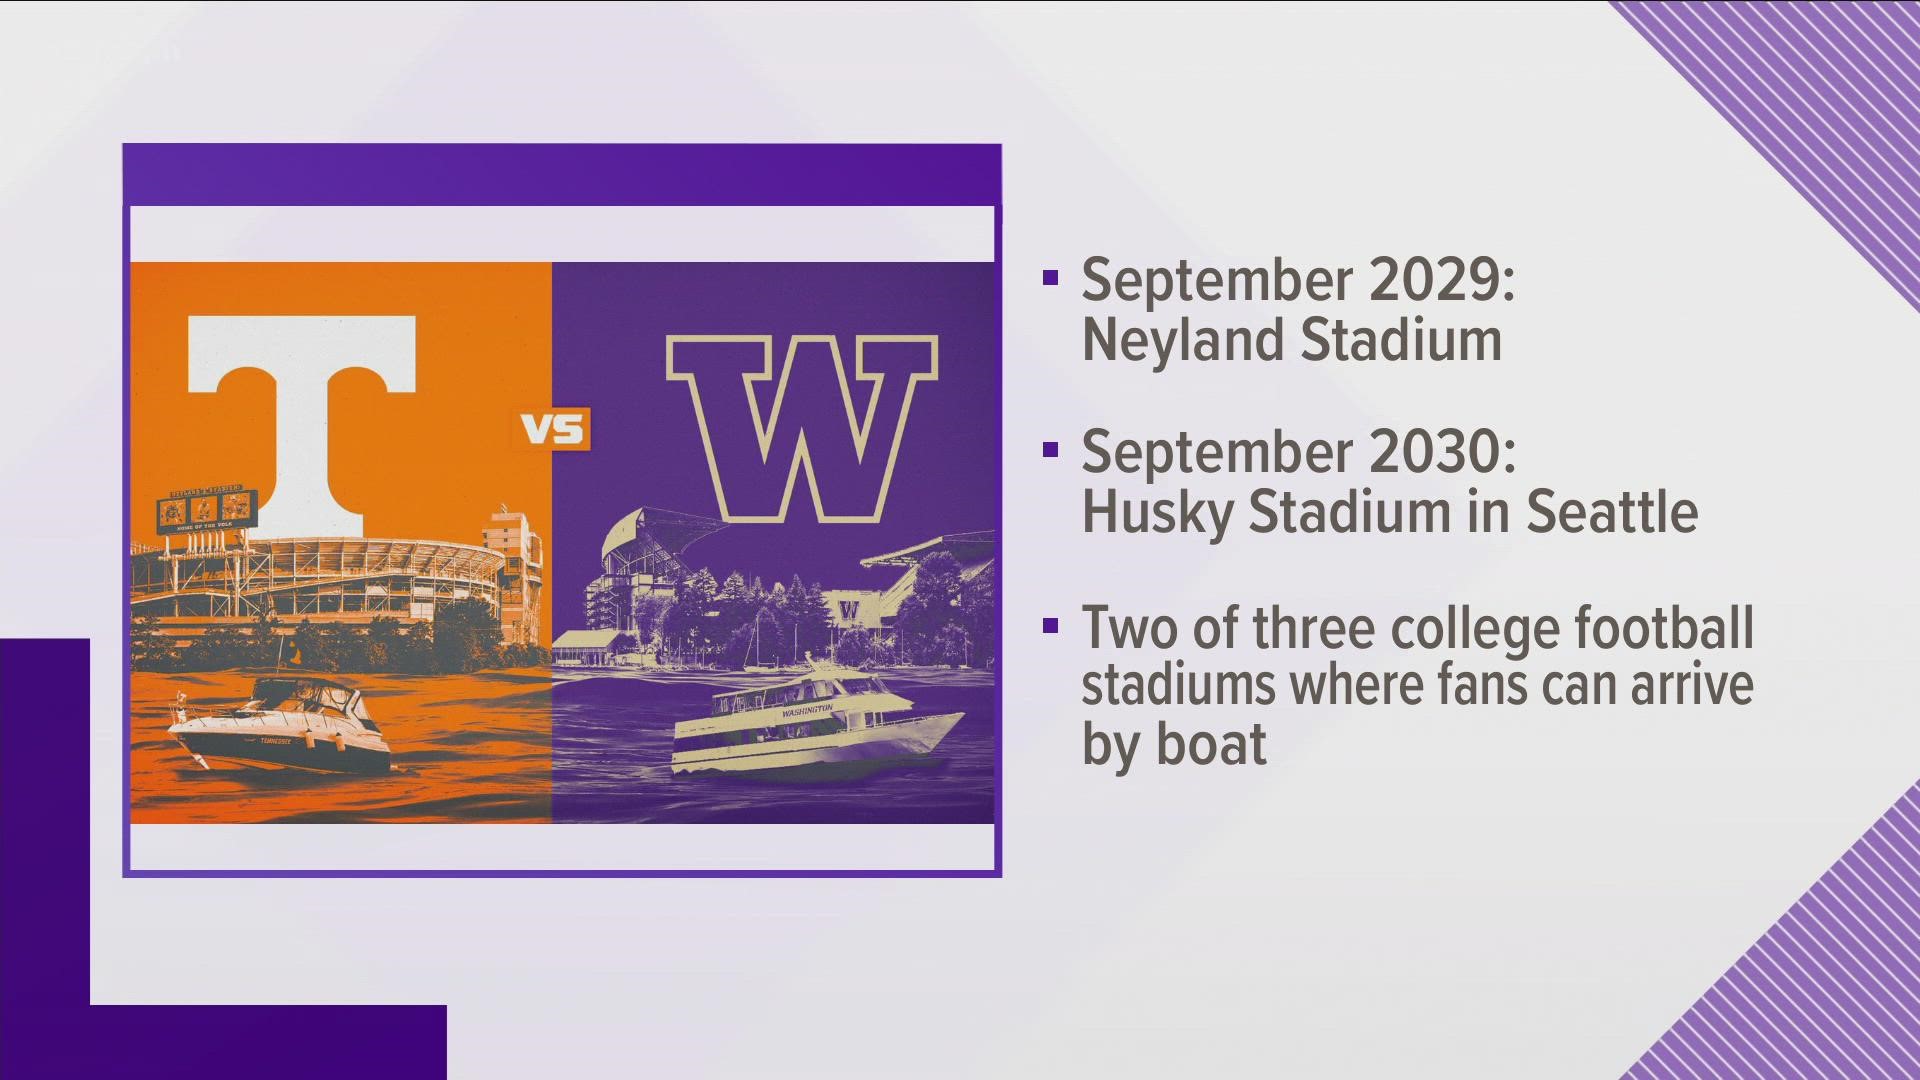 Neyland and Husky stadium are two of only three on-campus college football stadiums where fans can arrive by boat.